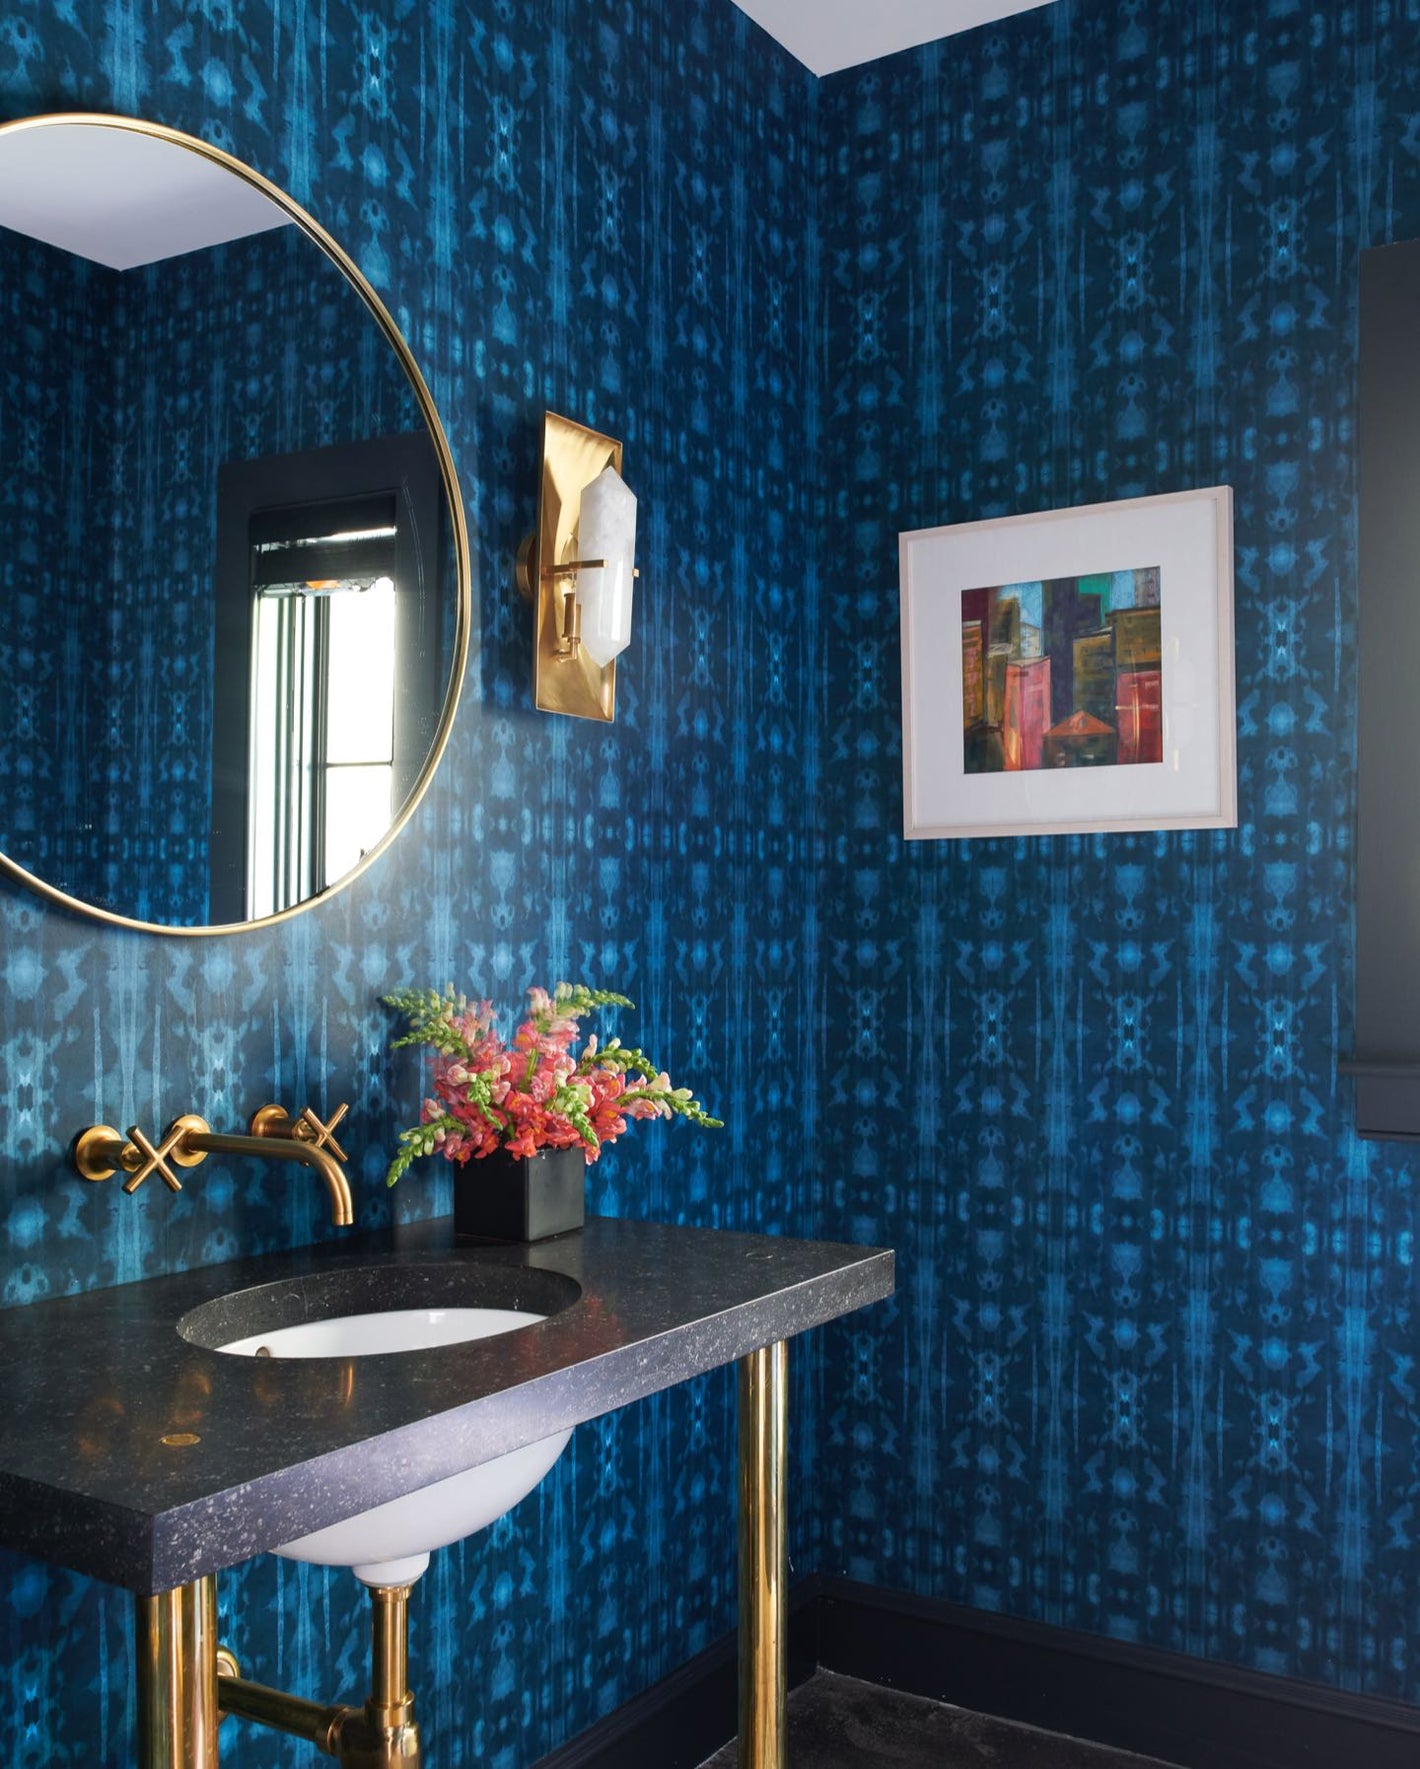 A bathroom with blue wallpaper and a gold mirror